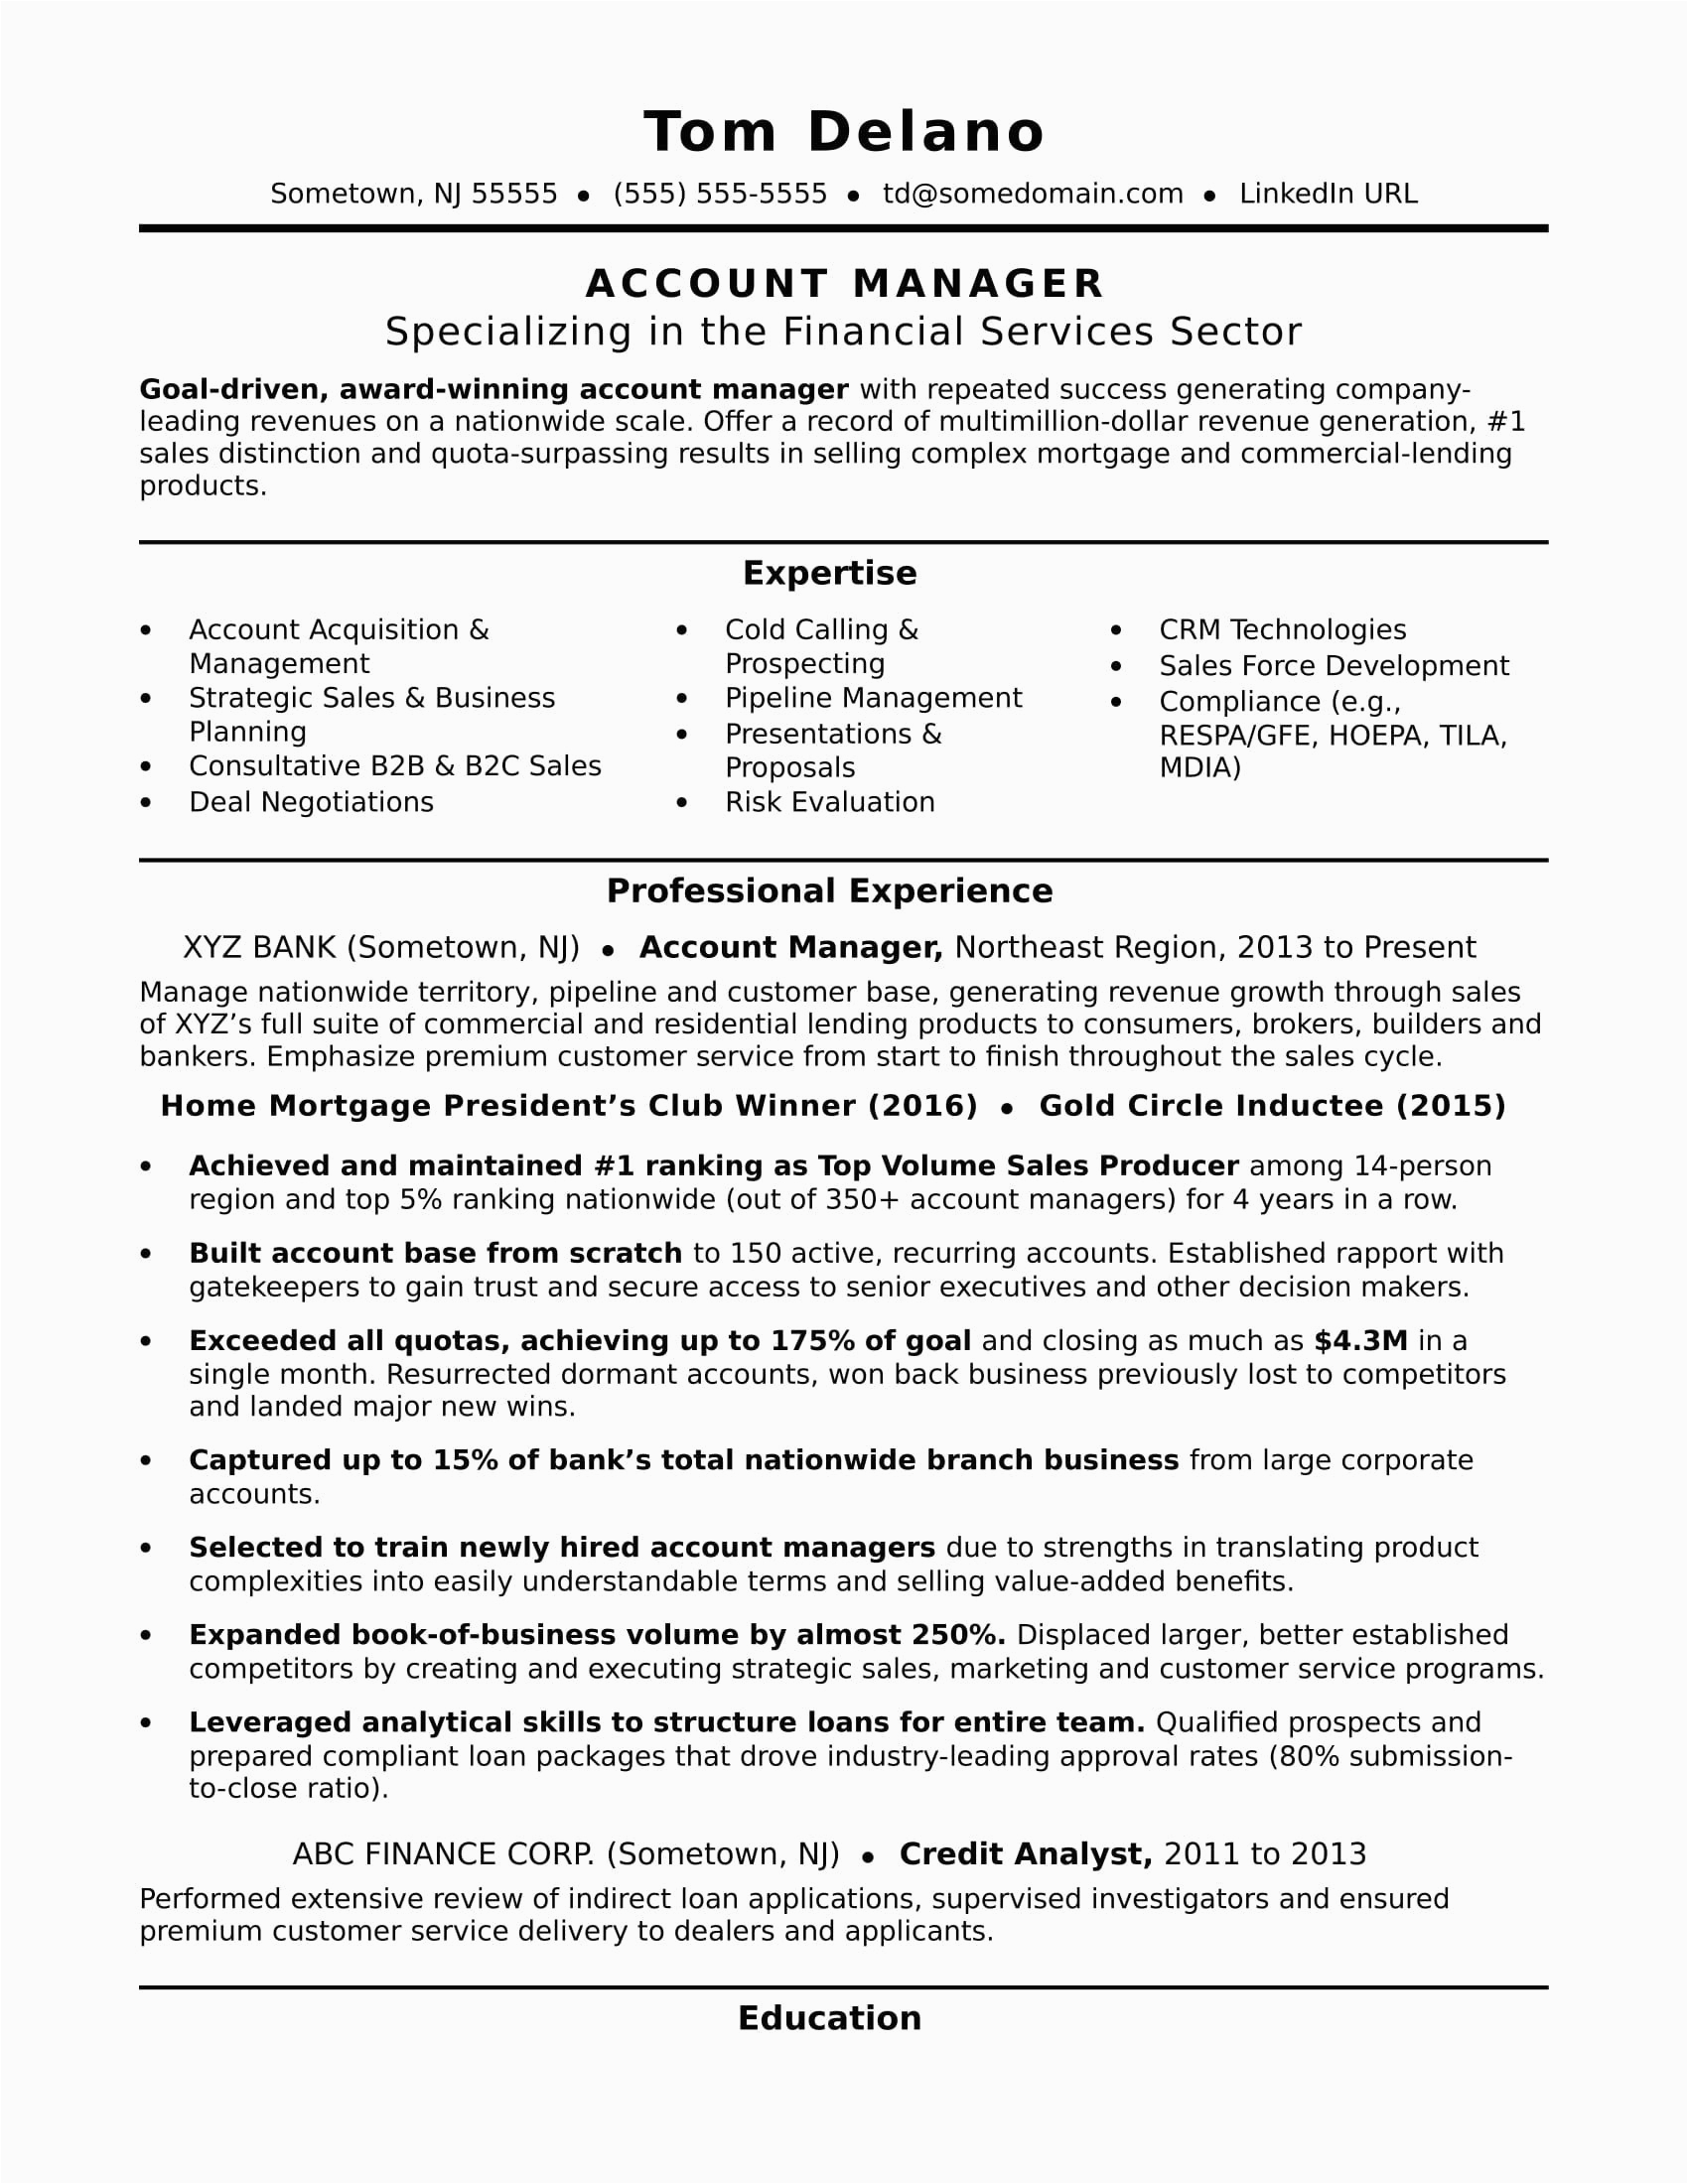 Accounts Manager Resume Samples In India Account Manager Resume Sample In India 2021